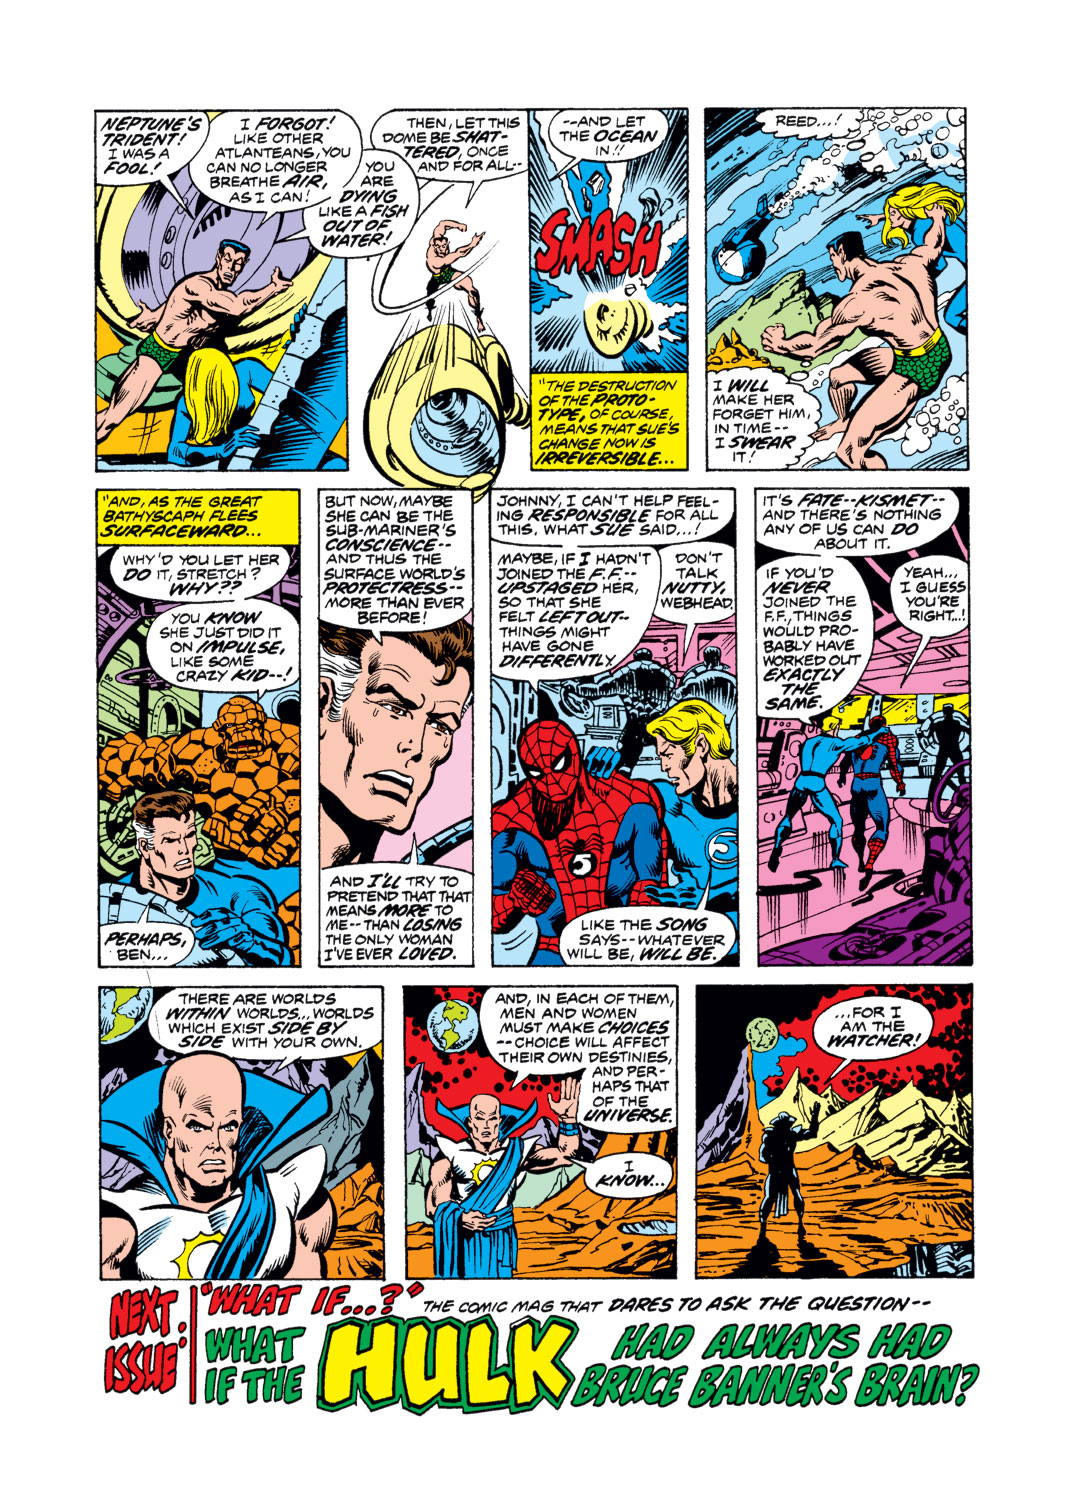 What If? (1977) issue 1 - Spider-Man joined the Fantastic Four - Page 33